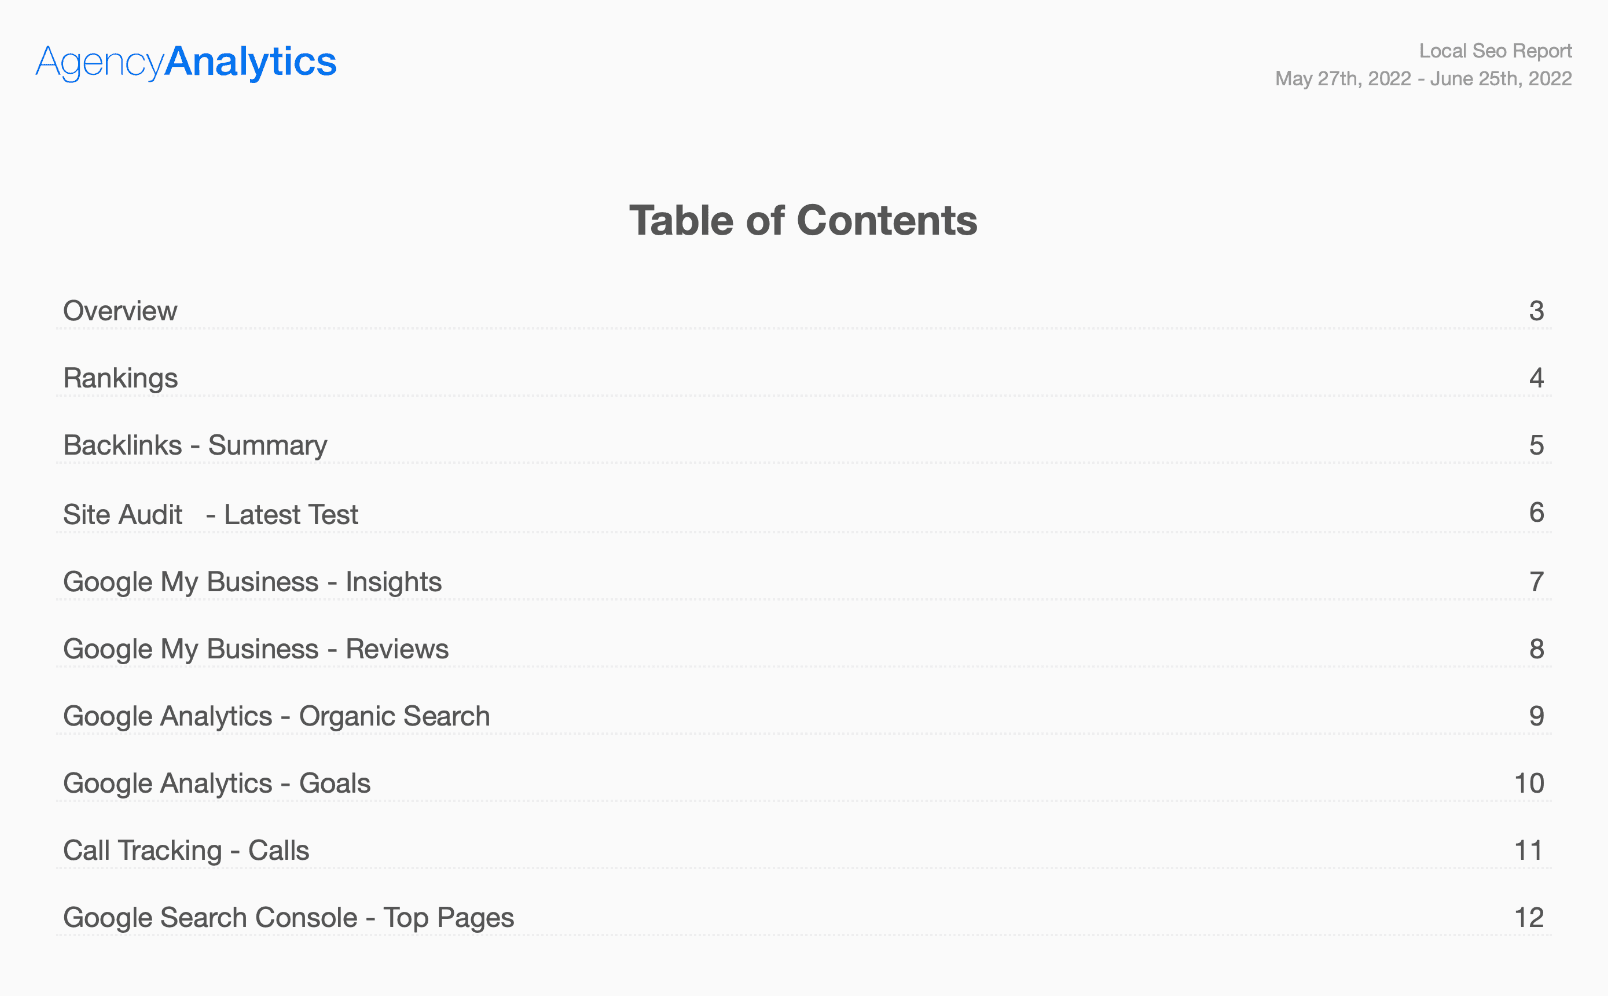 Local SEO Report Template Showing Table of Contents